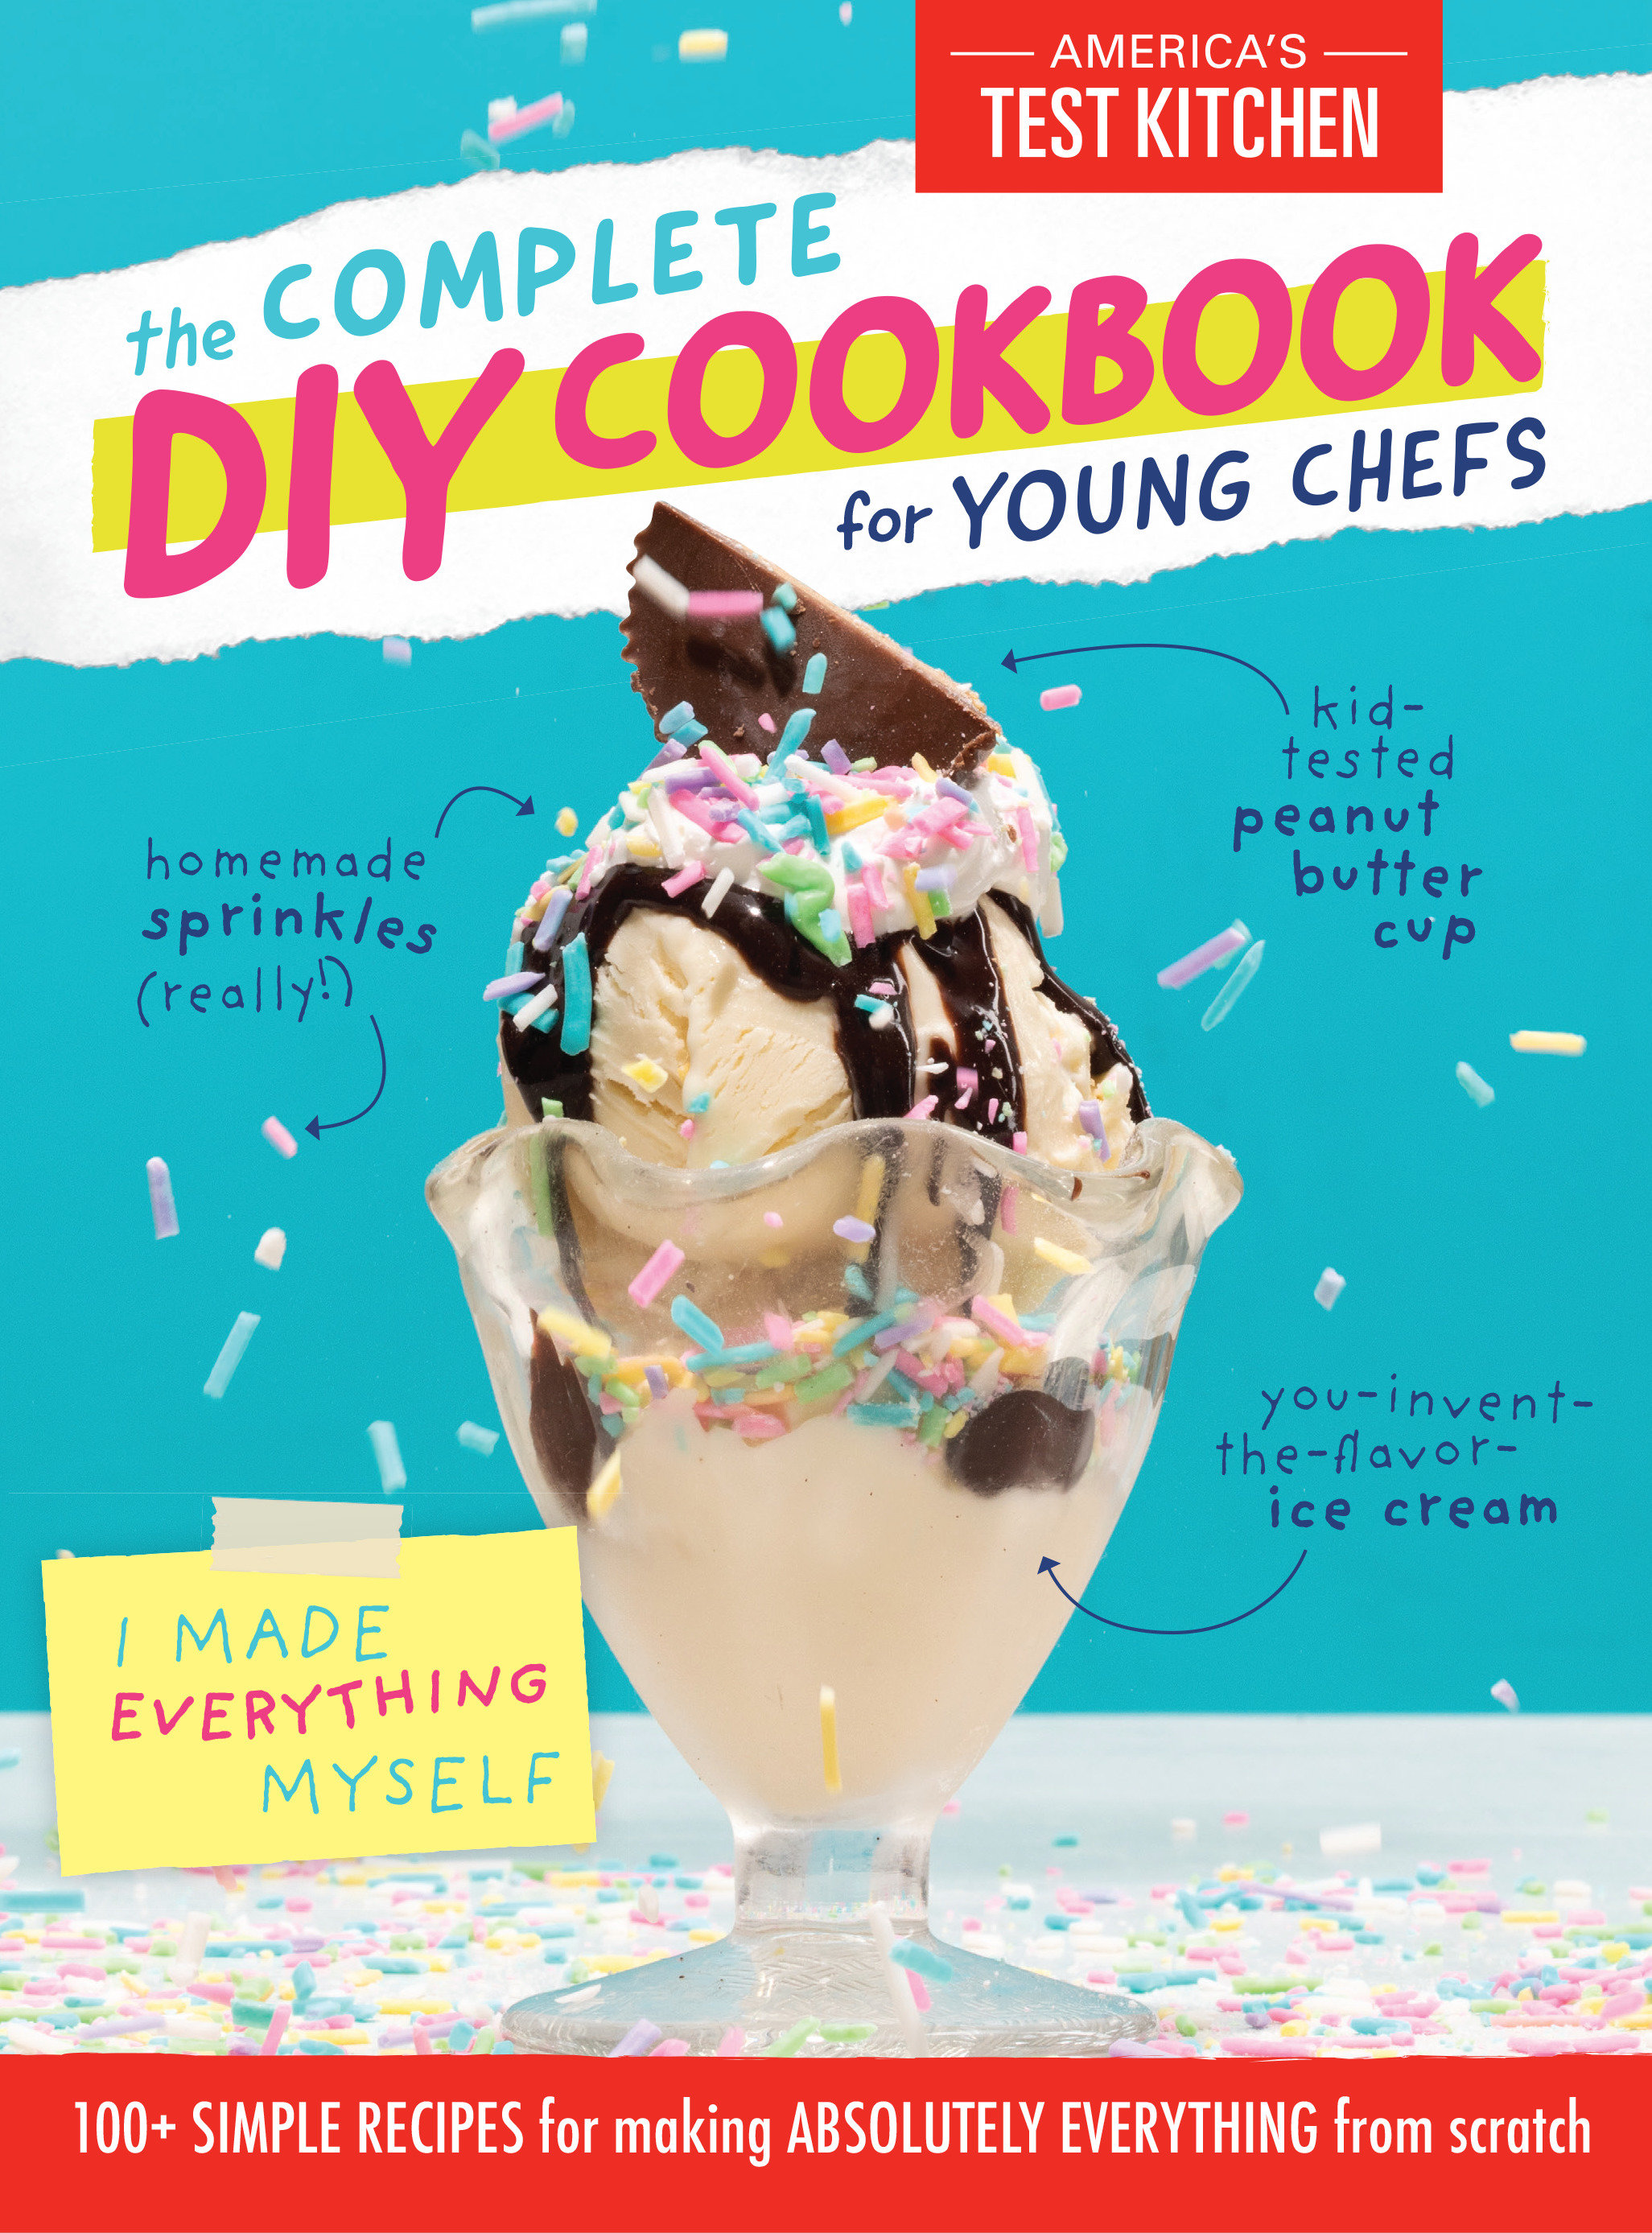 The Complete Diy Cookbook for Young Chefs (Hardcover Book)